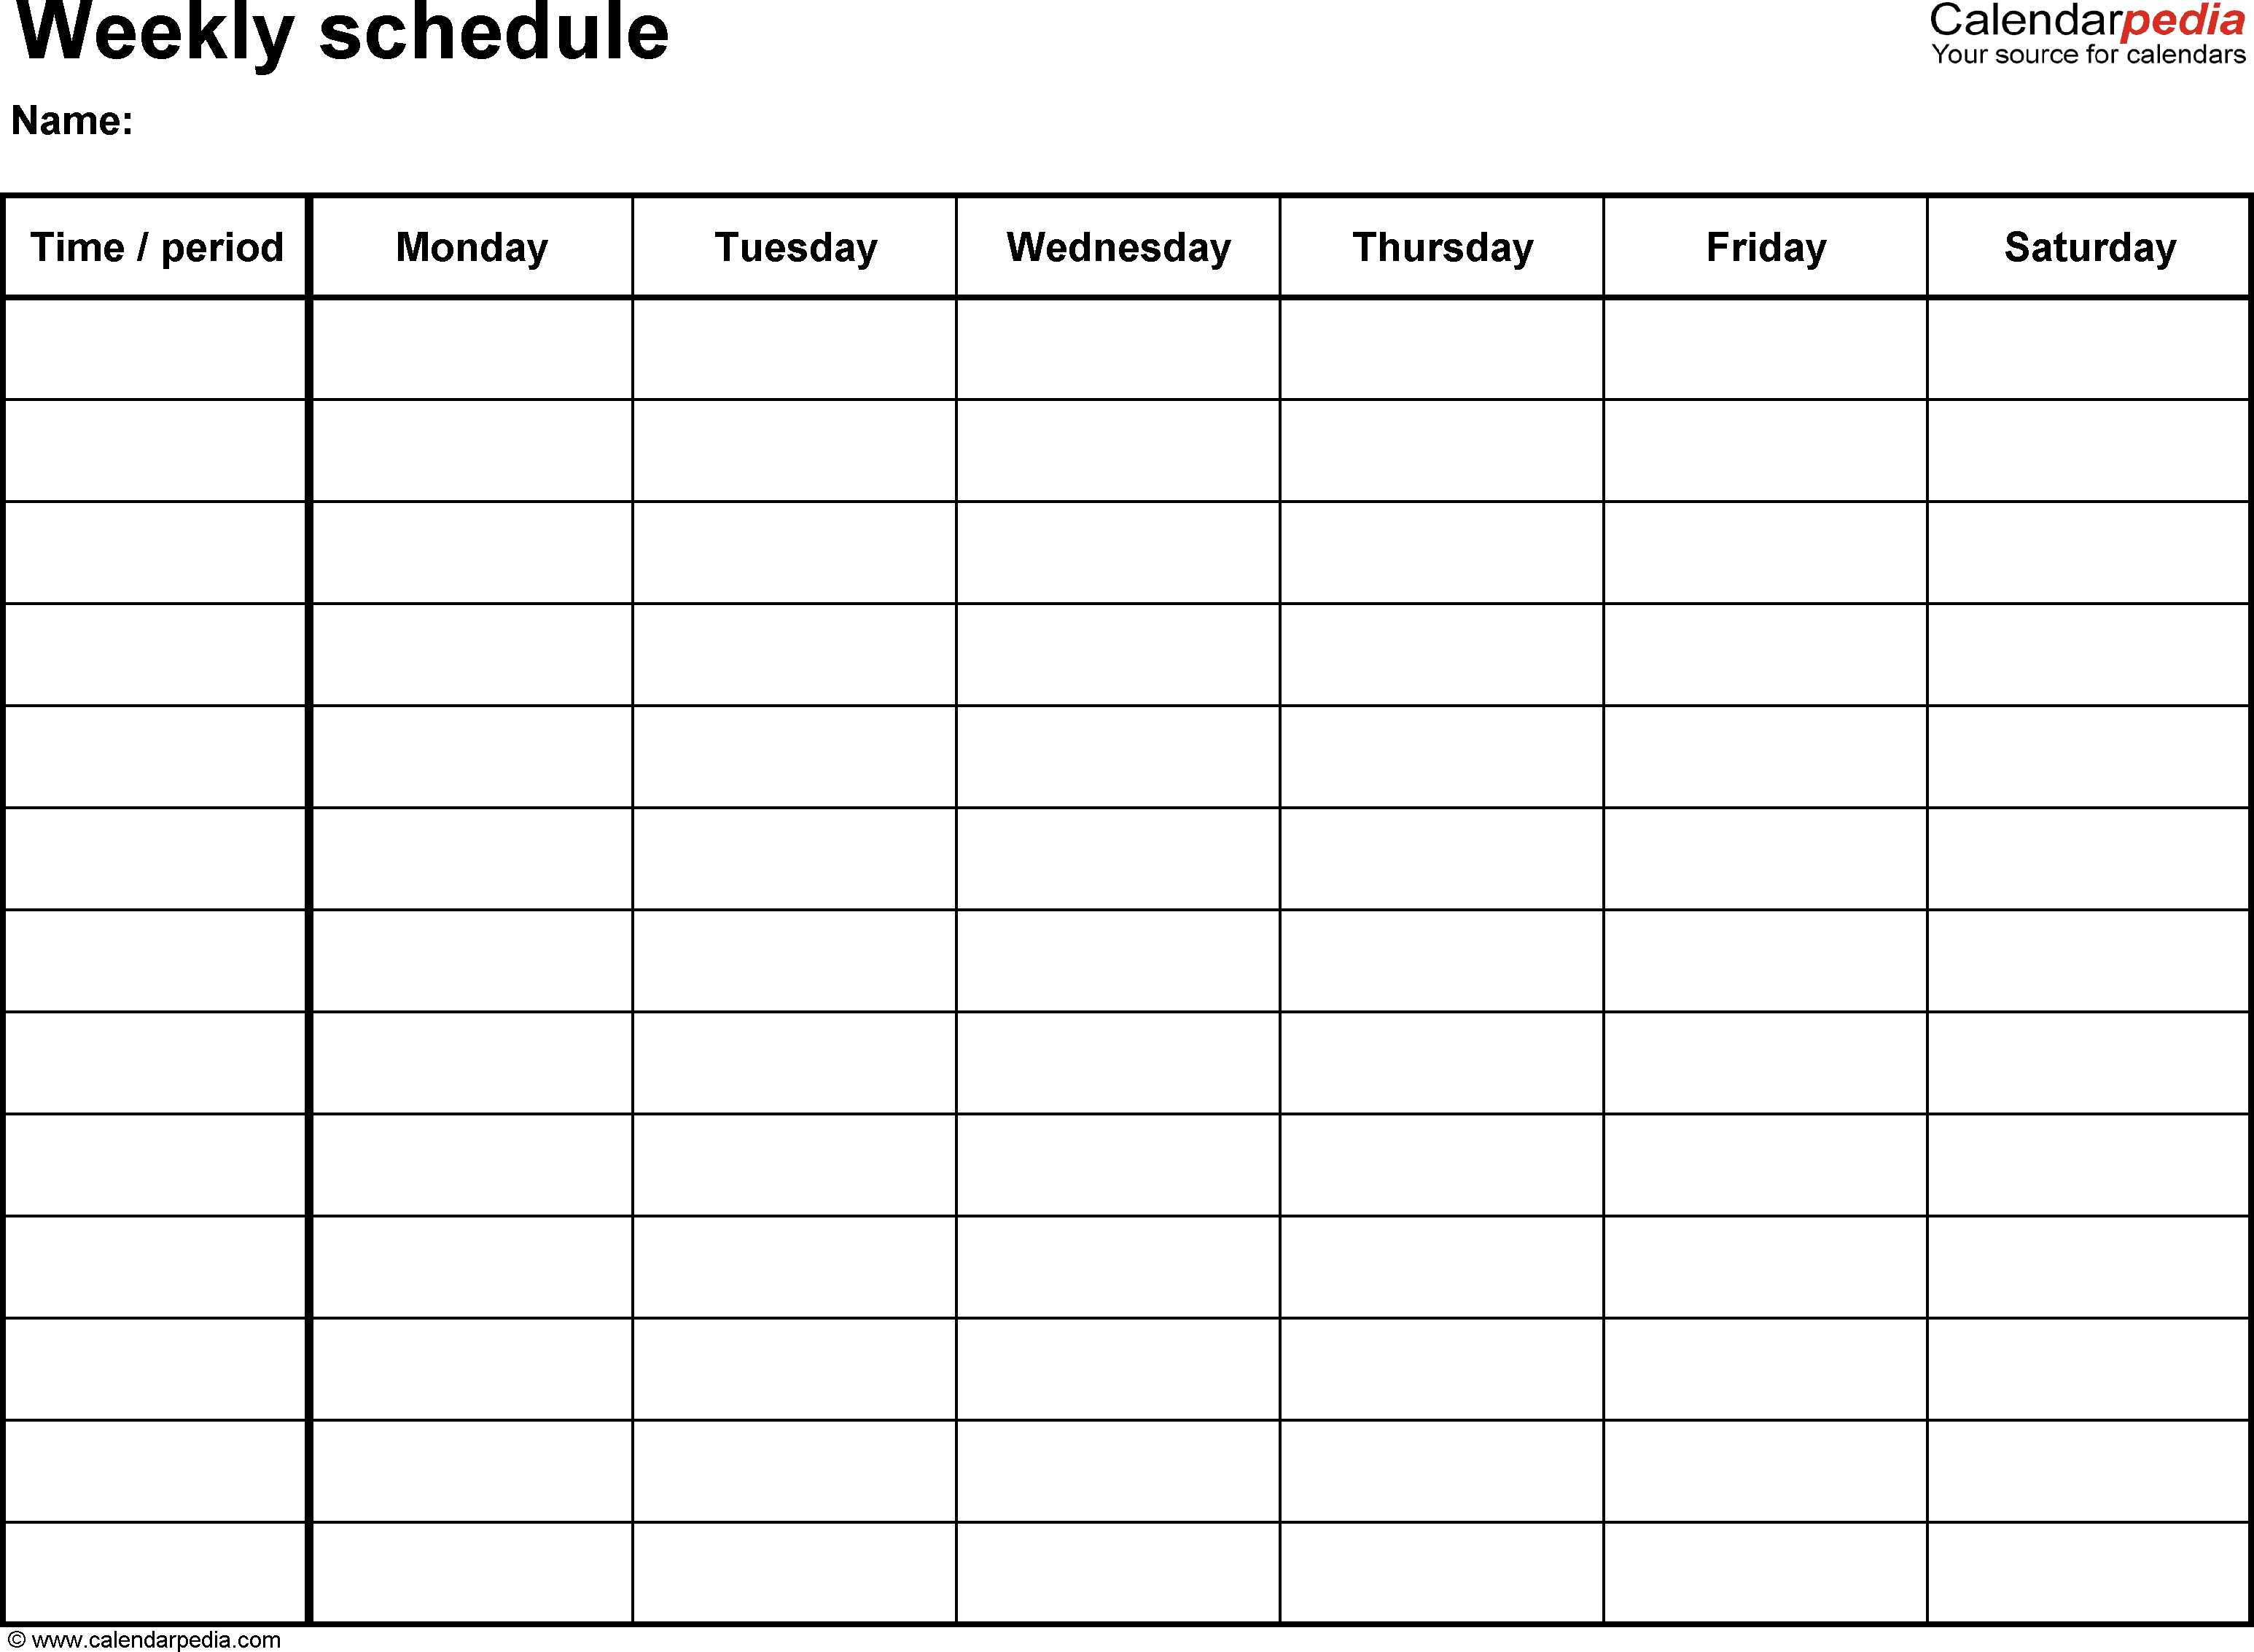 Free Weekly Schedule Templates For Excel - 18 Templates-Blank Printable Calendar With No Dates